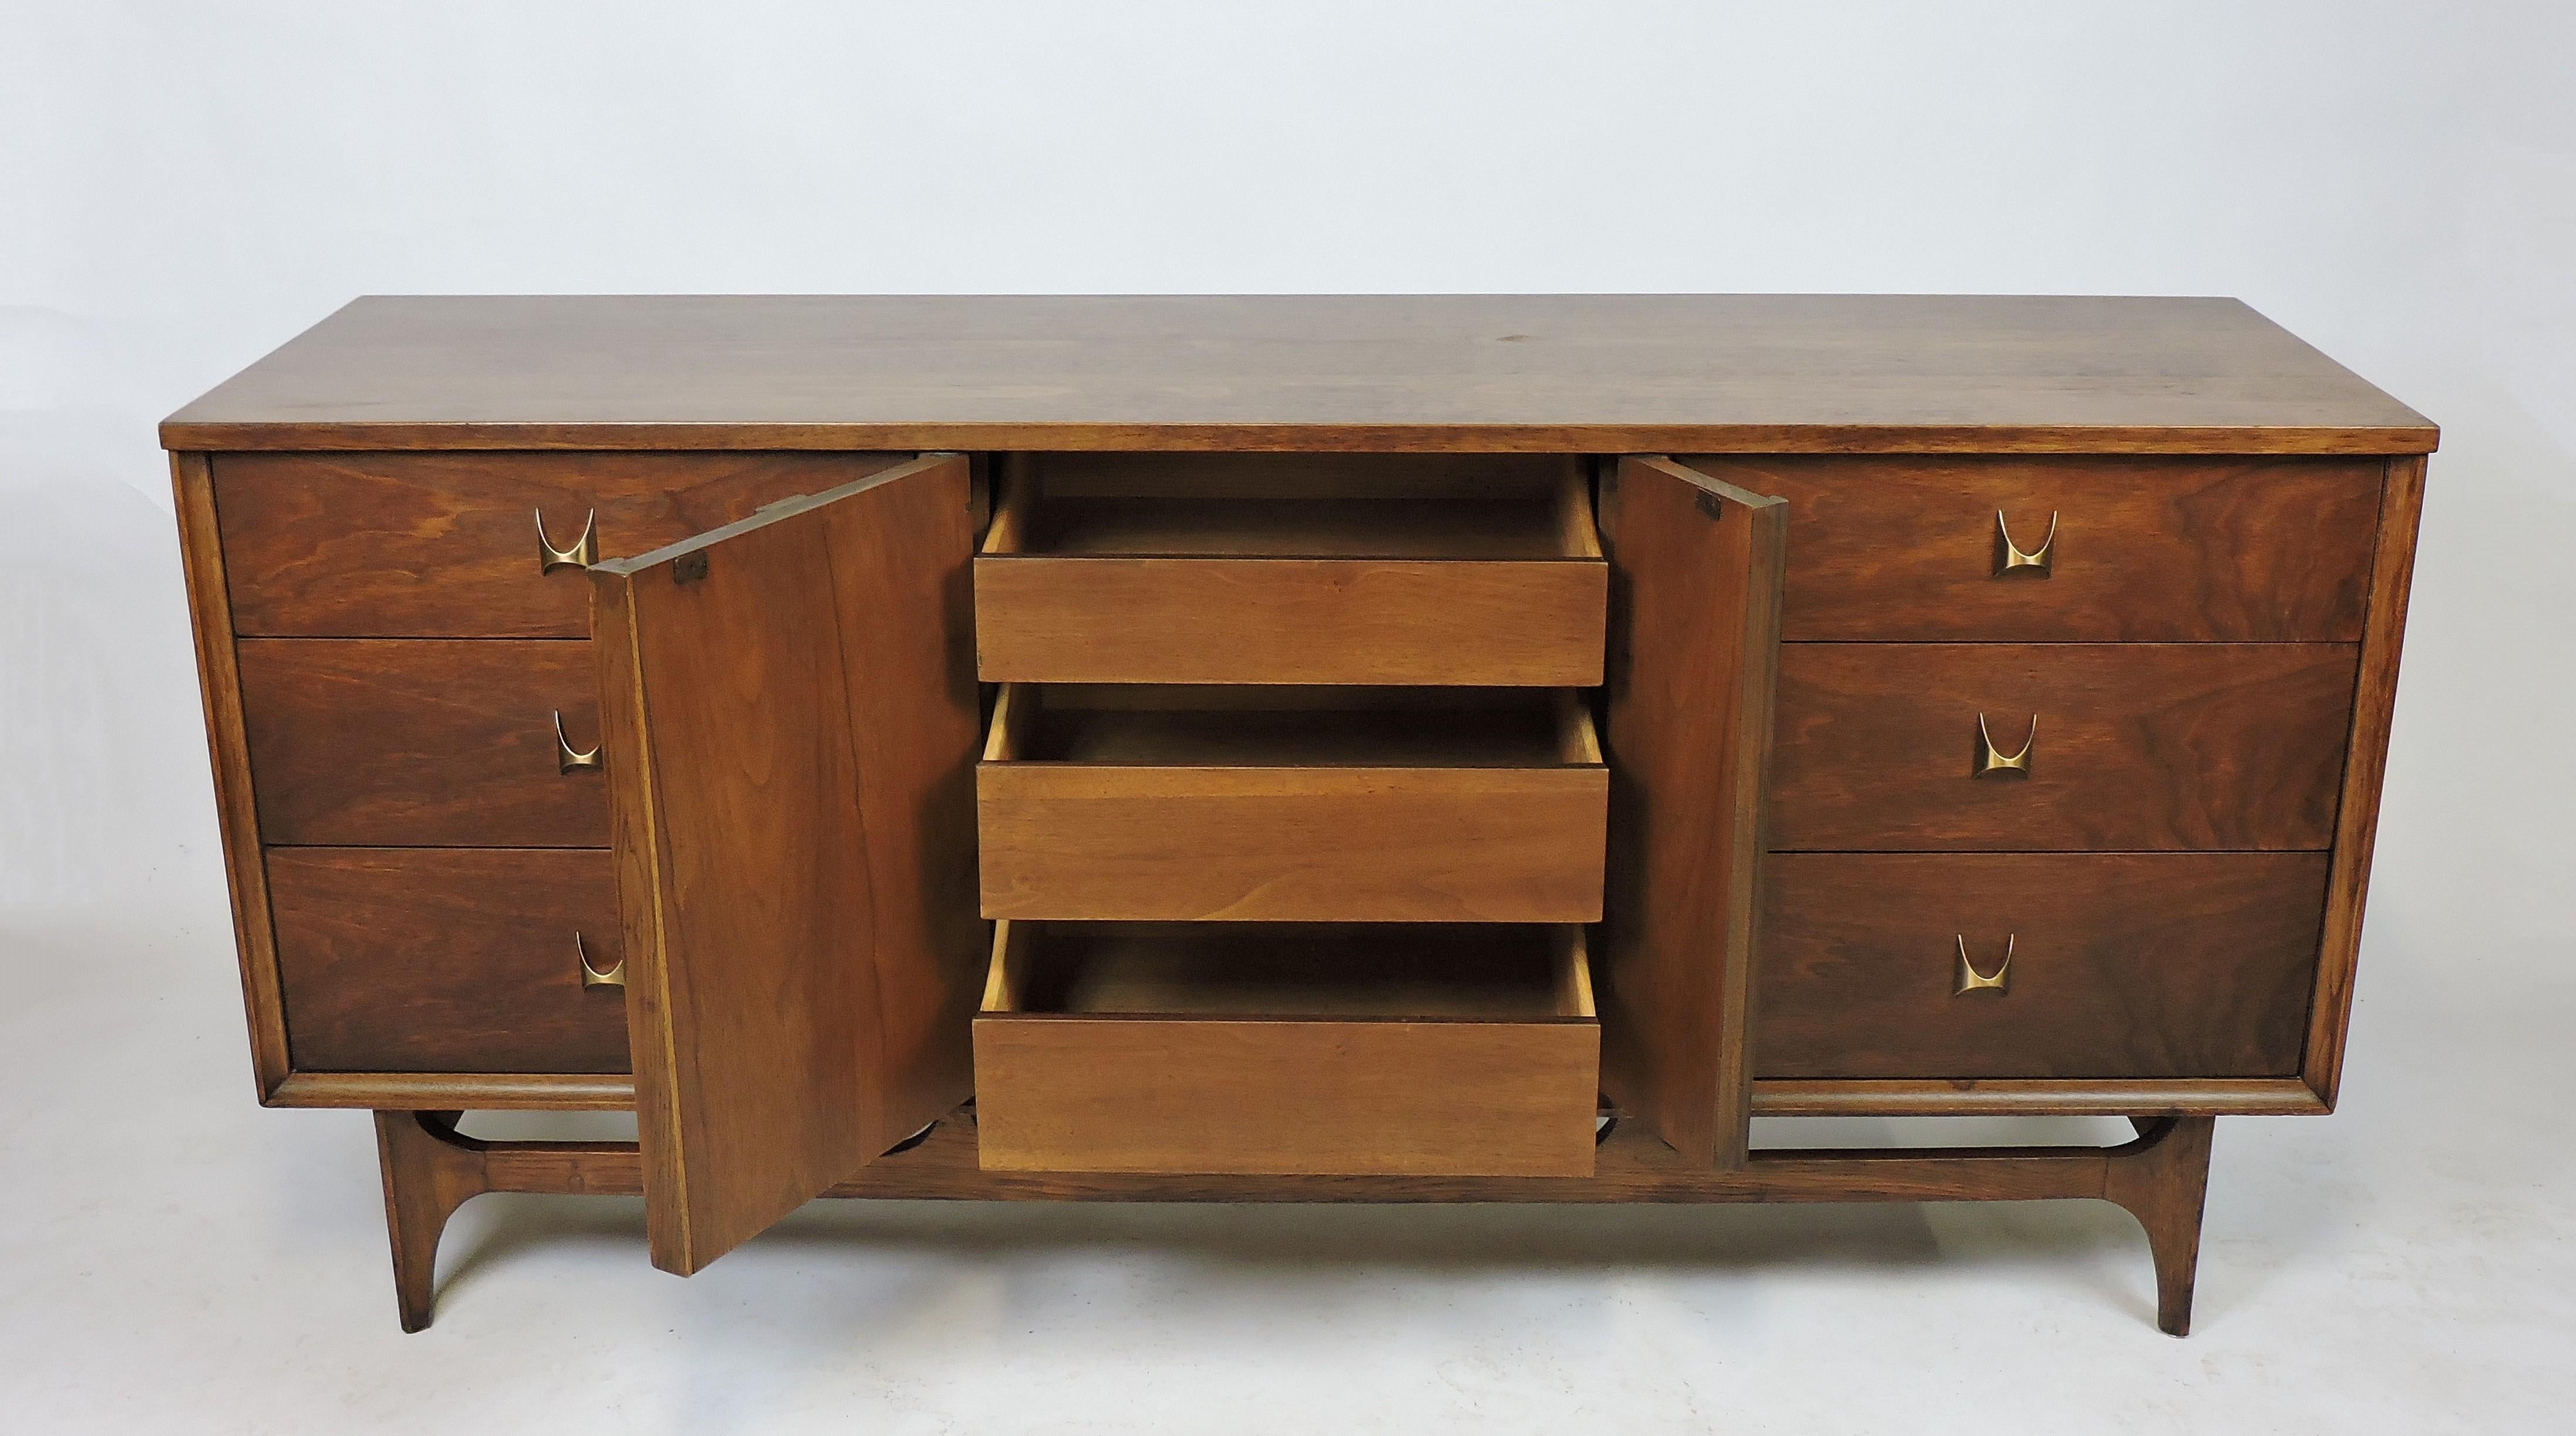 Distinctive walnut nine-drawer triple dresser which was part Broyhill's Brasilia line that was inspired by Oscar Niemeyers mid century Brazilian architecture. This cabinet has lots of storage with six large drawers and three concealed smaller ones.